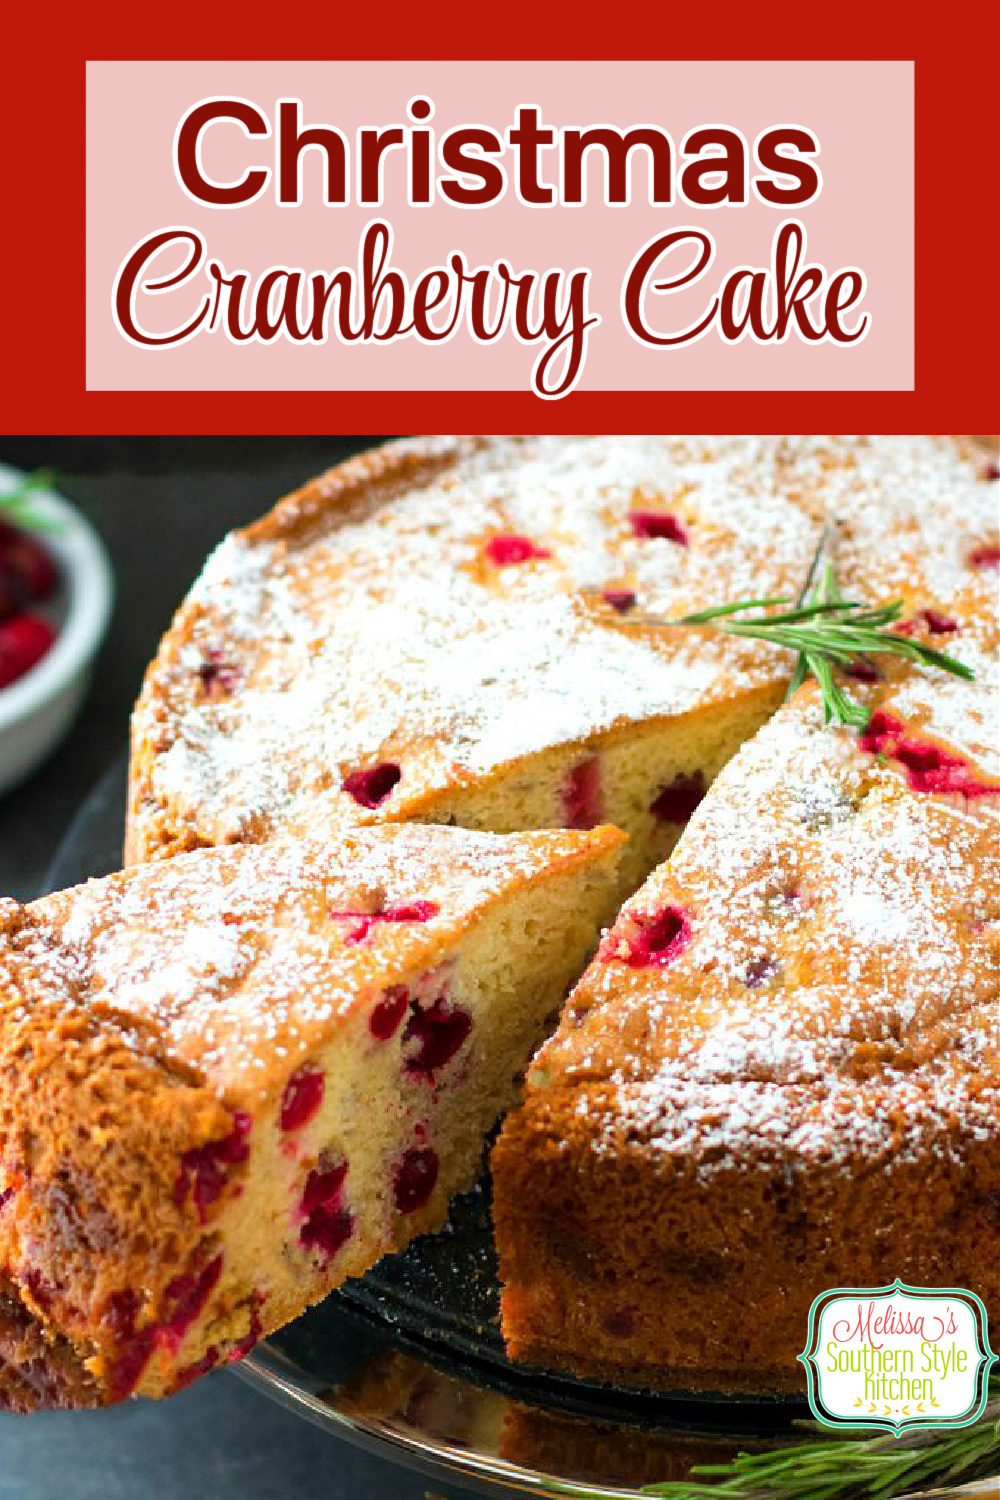 The perfect cake for holiday breakfasts, brunch and dessert for the holiday season #christmascranberrycake #cakes #cakerecipes #cranberrycake #christmascakerecipes #holidaybaking #Christmasdesserts #dessertfoodrecipes #desserts #cake #southerncakes #southernrecipes